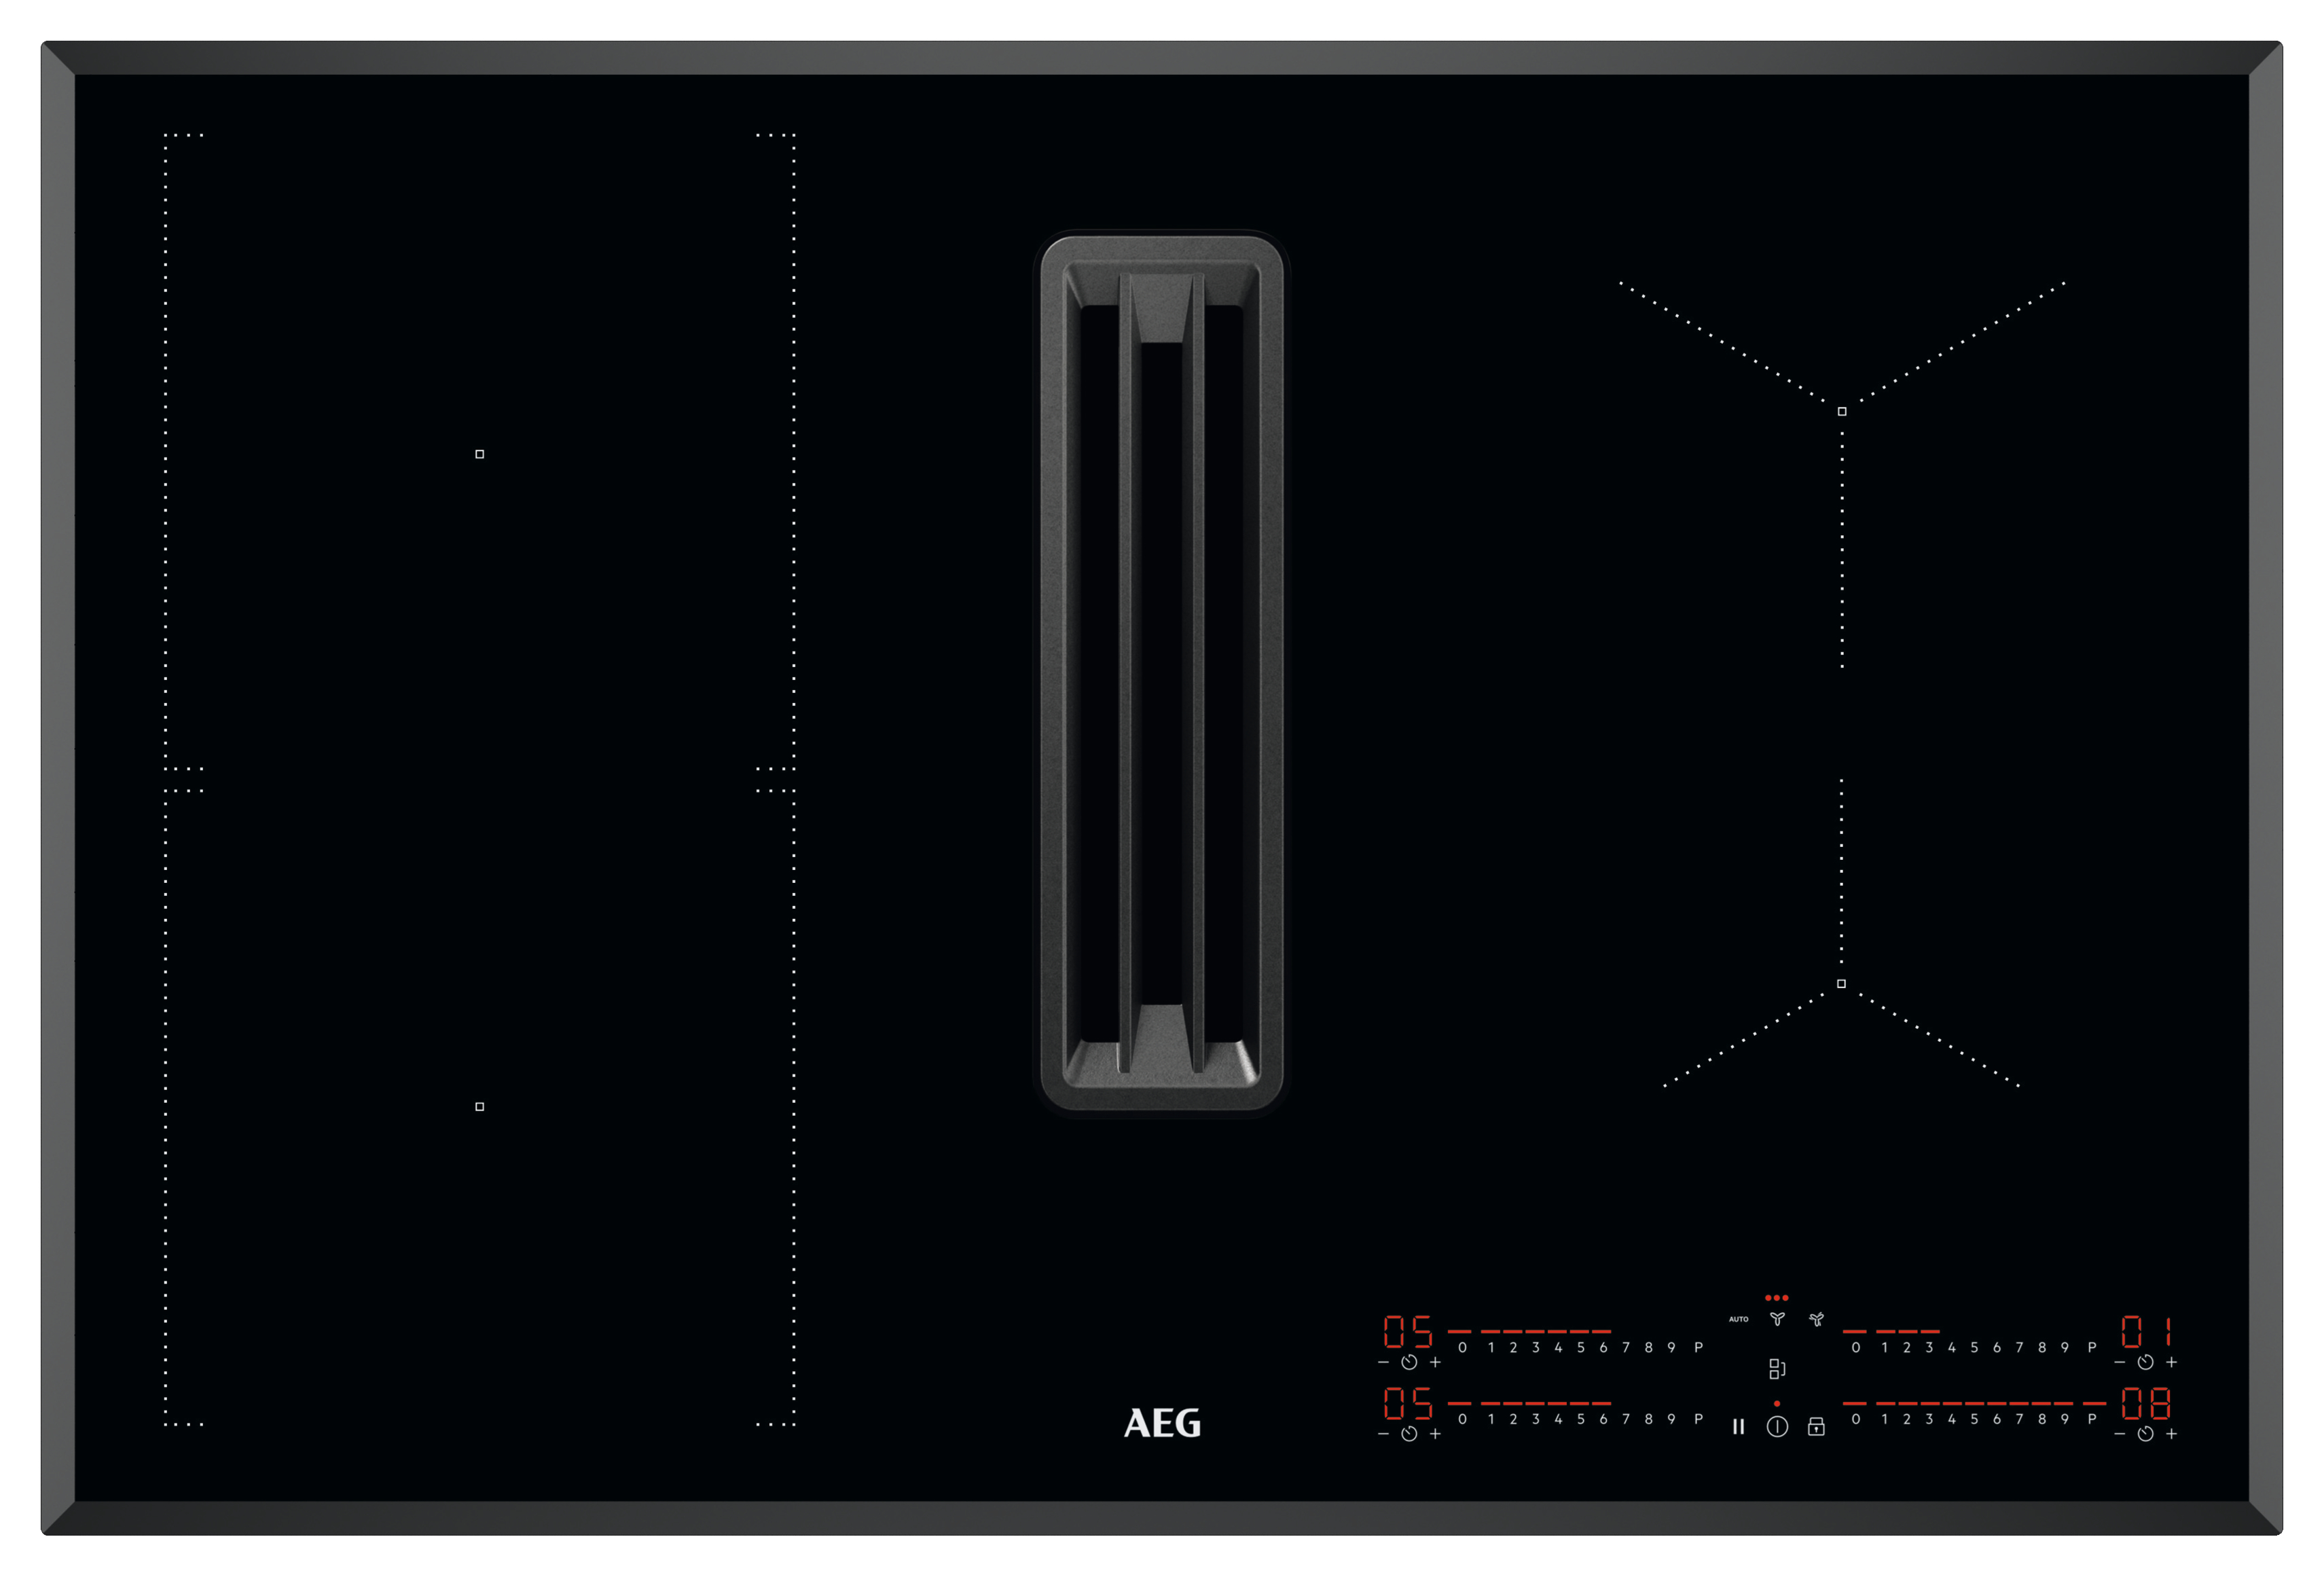 AEG 6000 Series CCE84543FB Black Induction Hob with Recirculation Extractor - 80cm